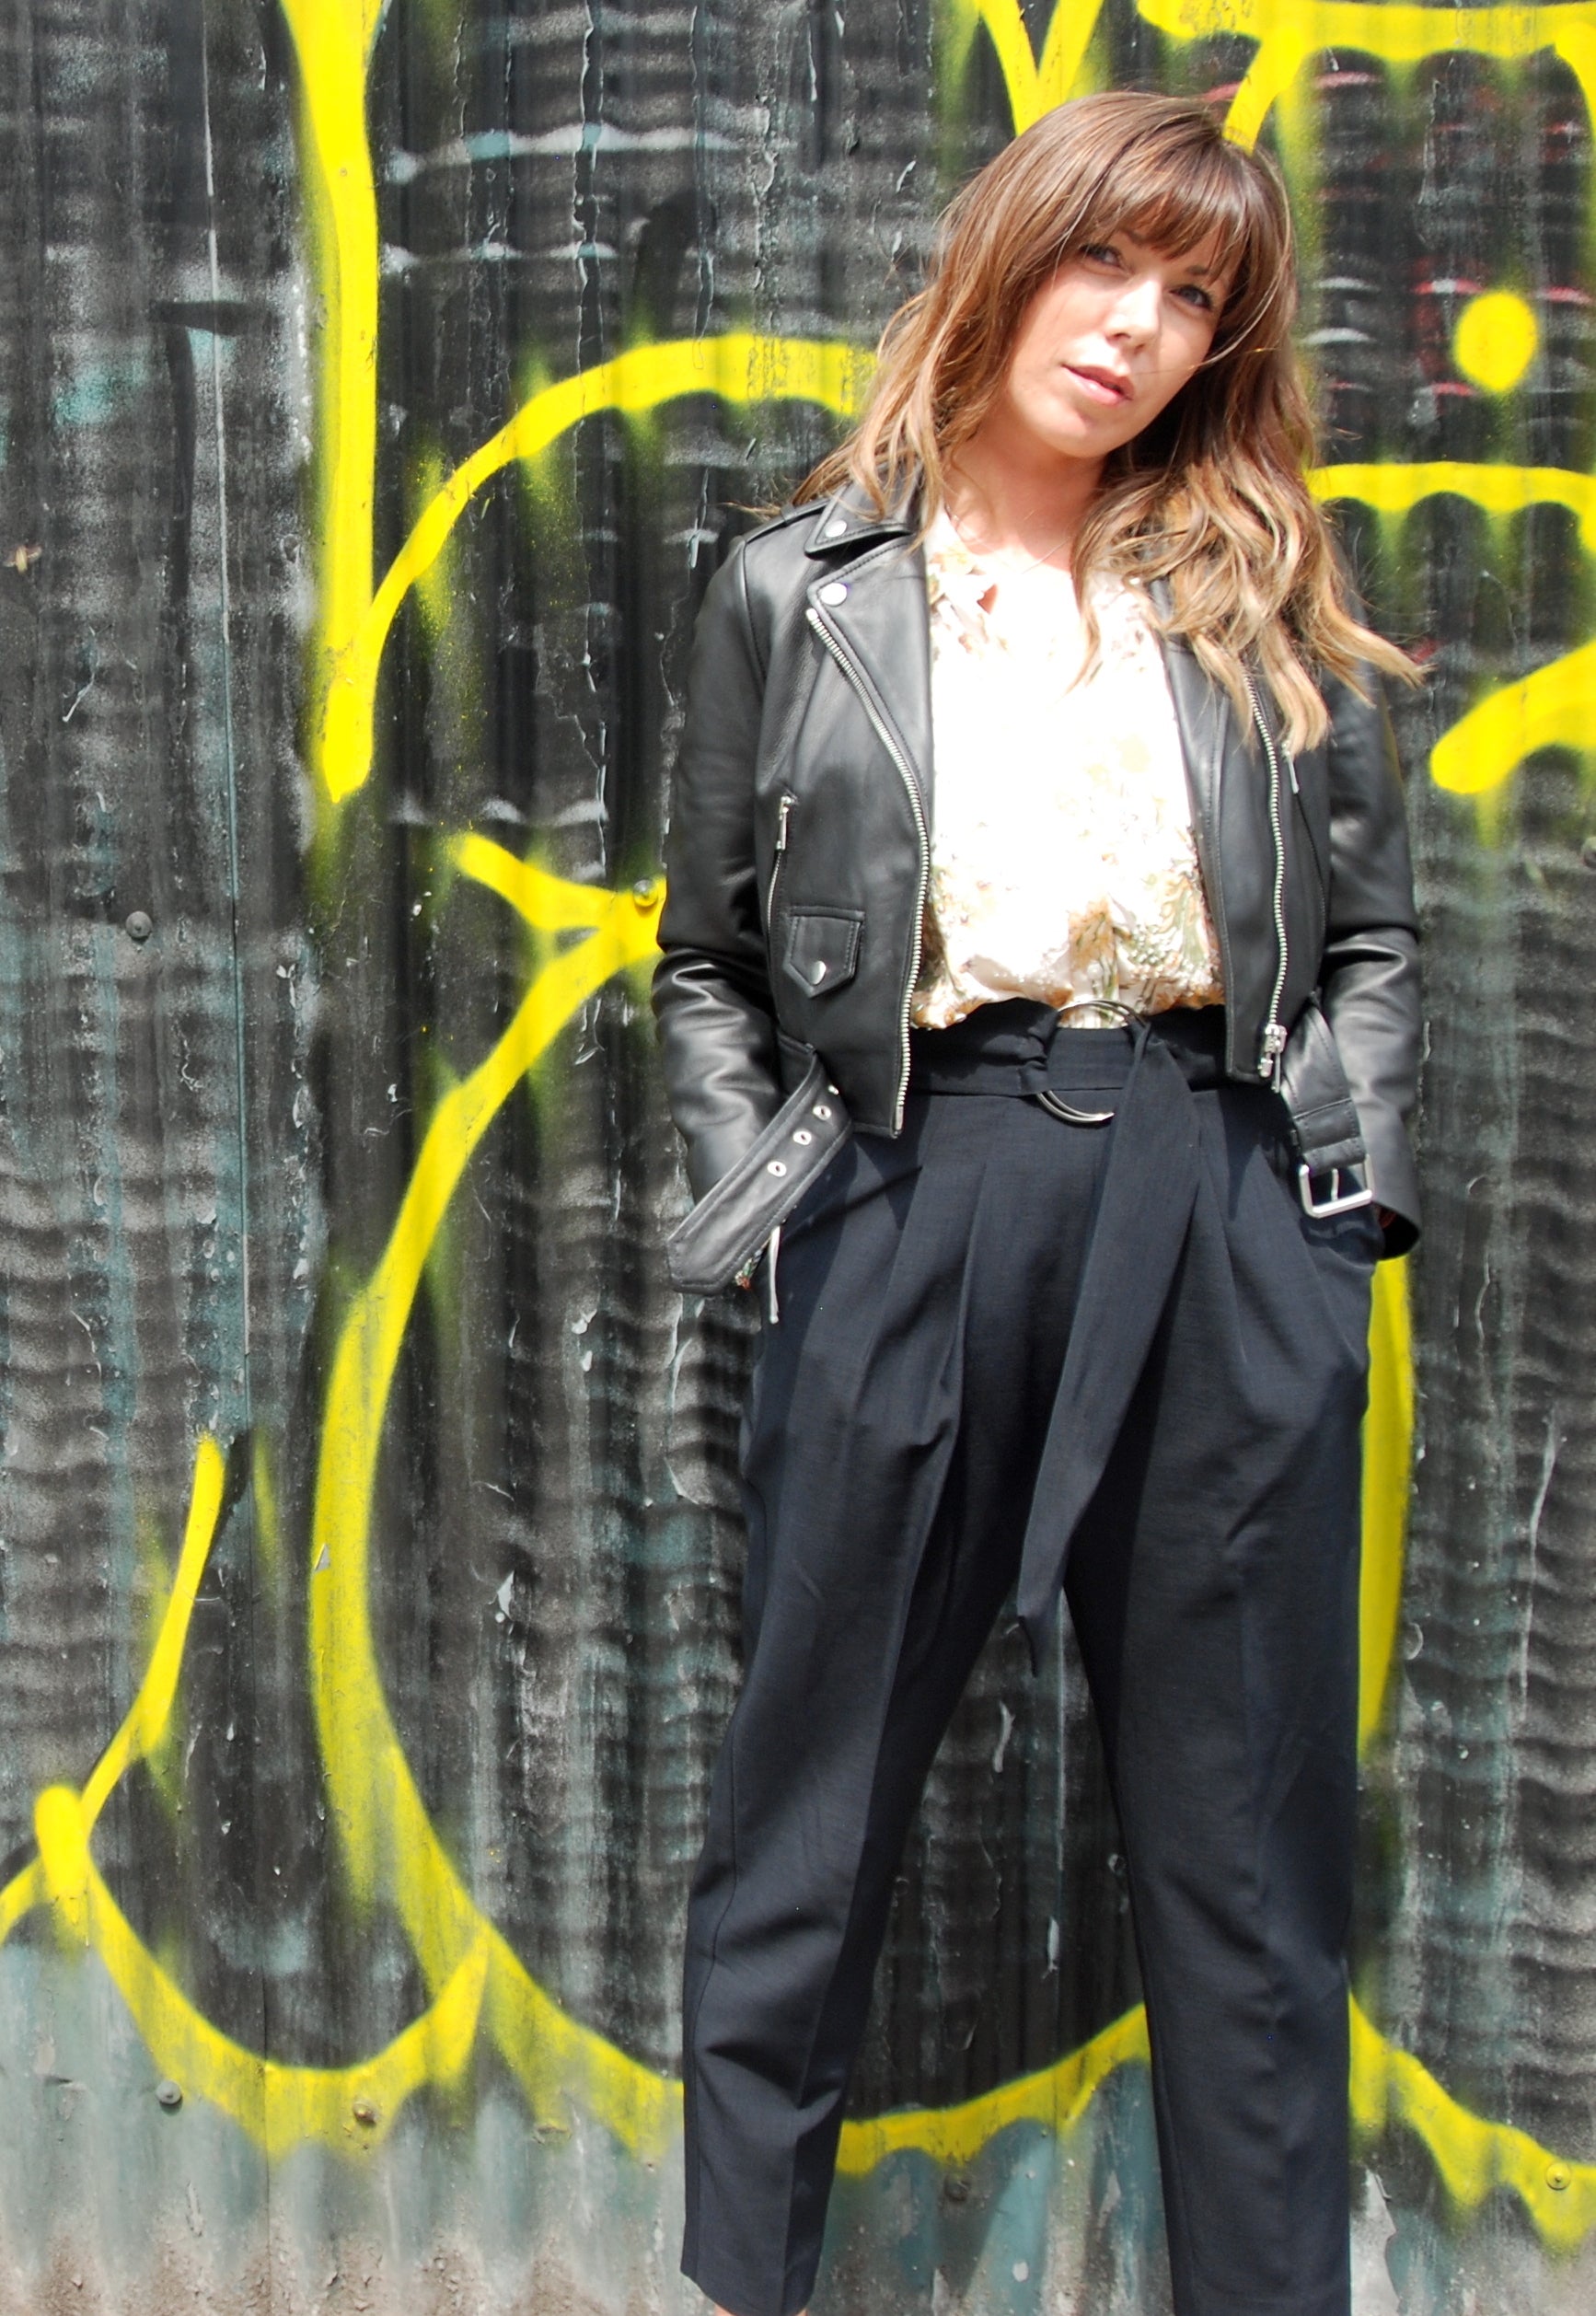 The "Dancing in the street" cropped biker jacket